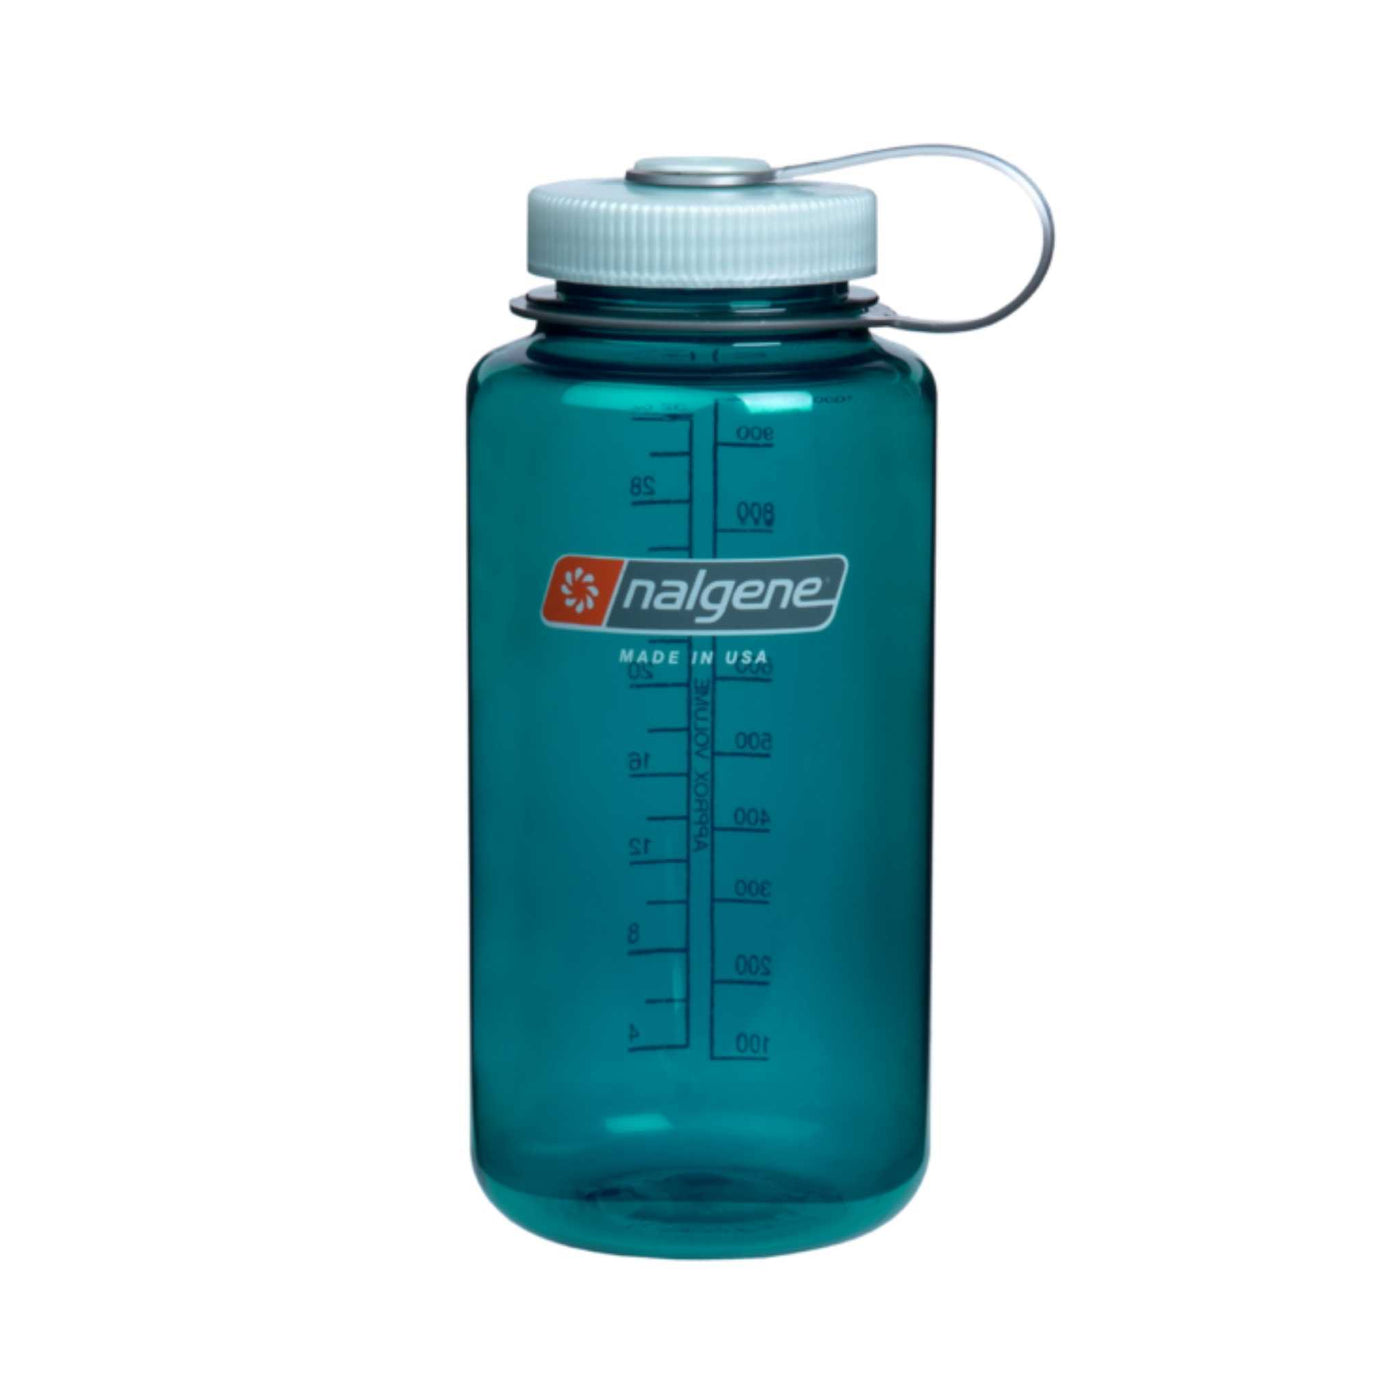 Nalgene Sustain Wide Mouth Bottle 1L | Hiking Water Bottles and Flasks | Further Faster Christchurch NZ #nalgene-trout-green